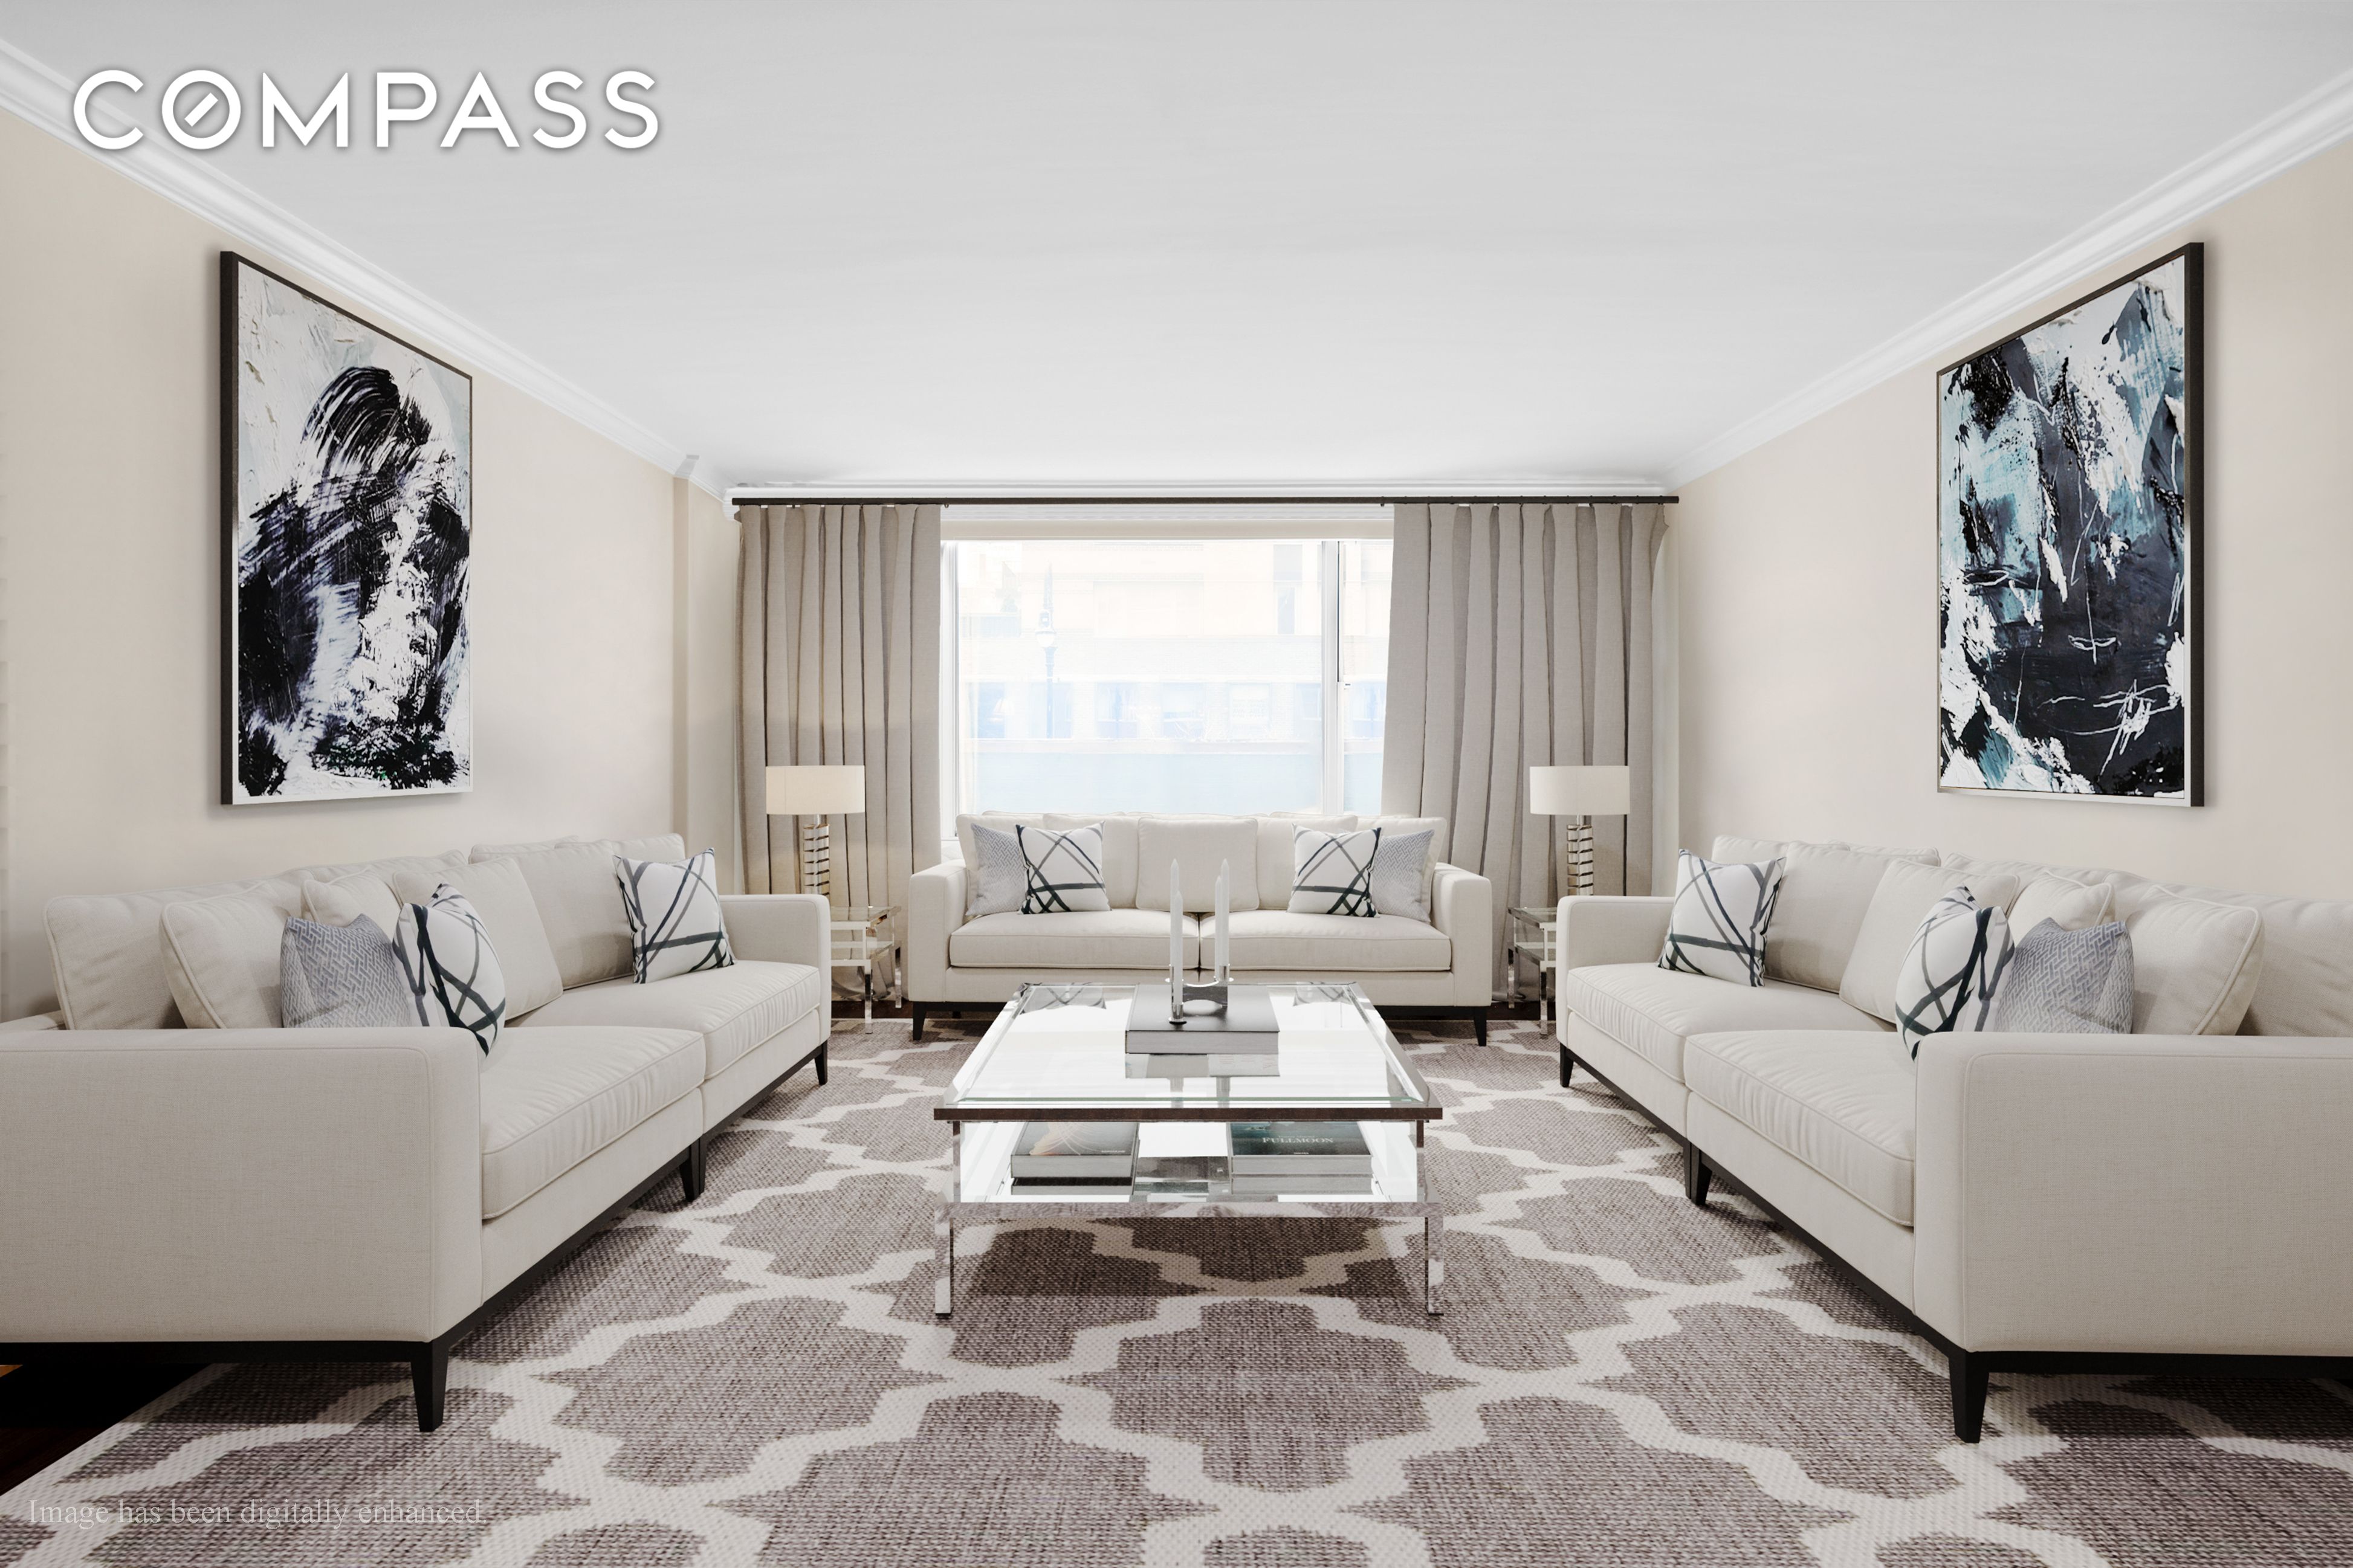 201 East 62nd Street 2A, Lenox Hill, Upper East Side, NYC - 5 Bedrooms  
5.5 Bathrooms  
8 Rooms - 